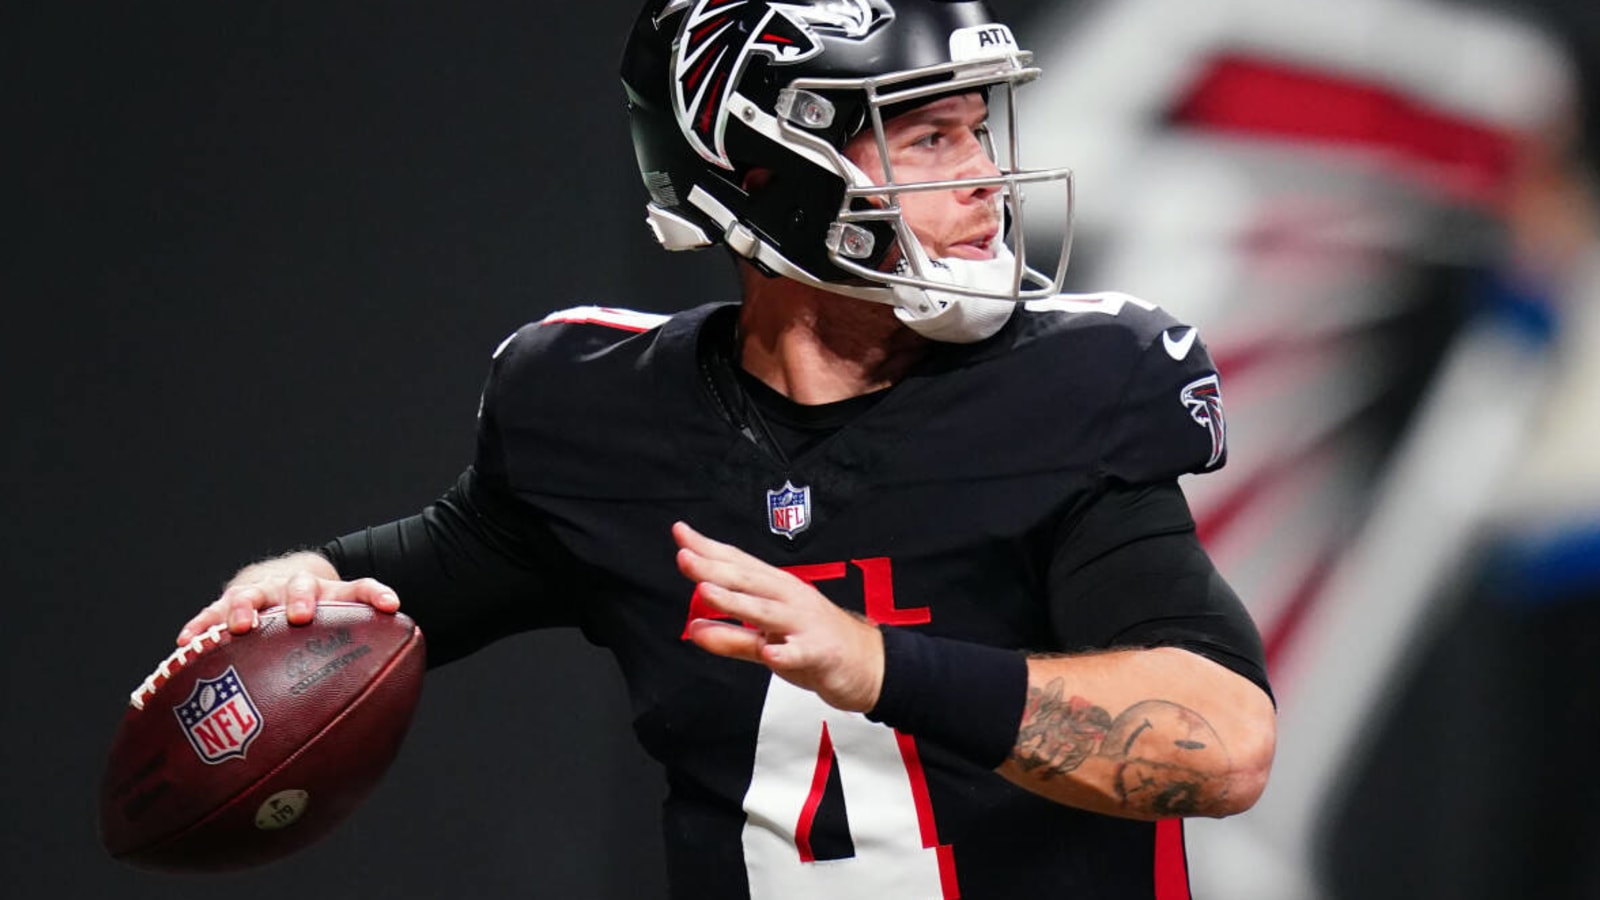 LOOK: Heinicke Buys New Shoes After Falcons Win vs. Colts